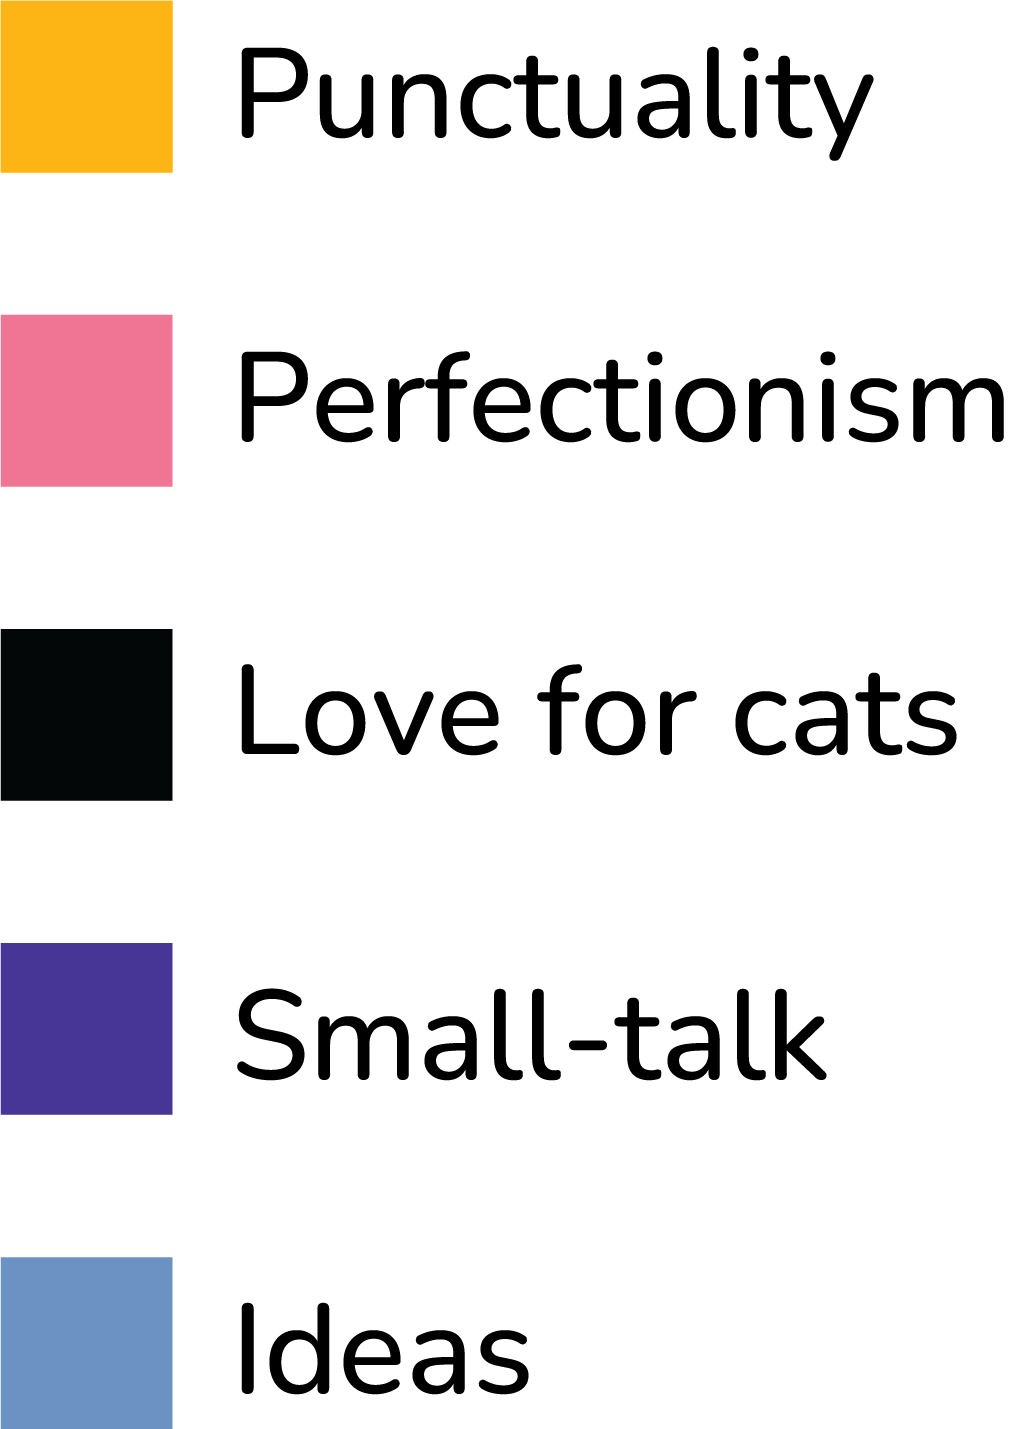 Legend for the stat chart. 1.Yellow-Punctuality 2.Pink-Perfectionism 3.Black-Love for cats, 4. Dark blue- Small-talk, 5.Light blue-Ideas